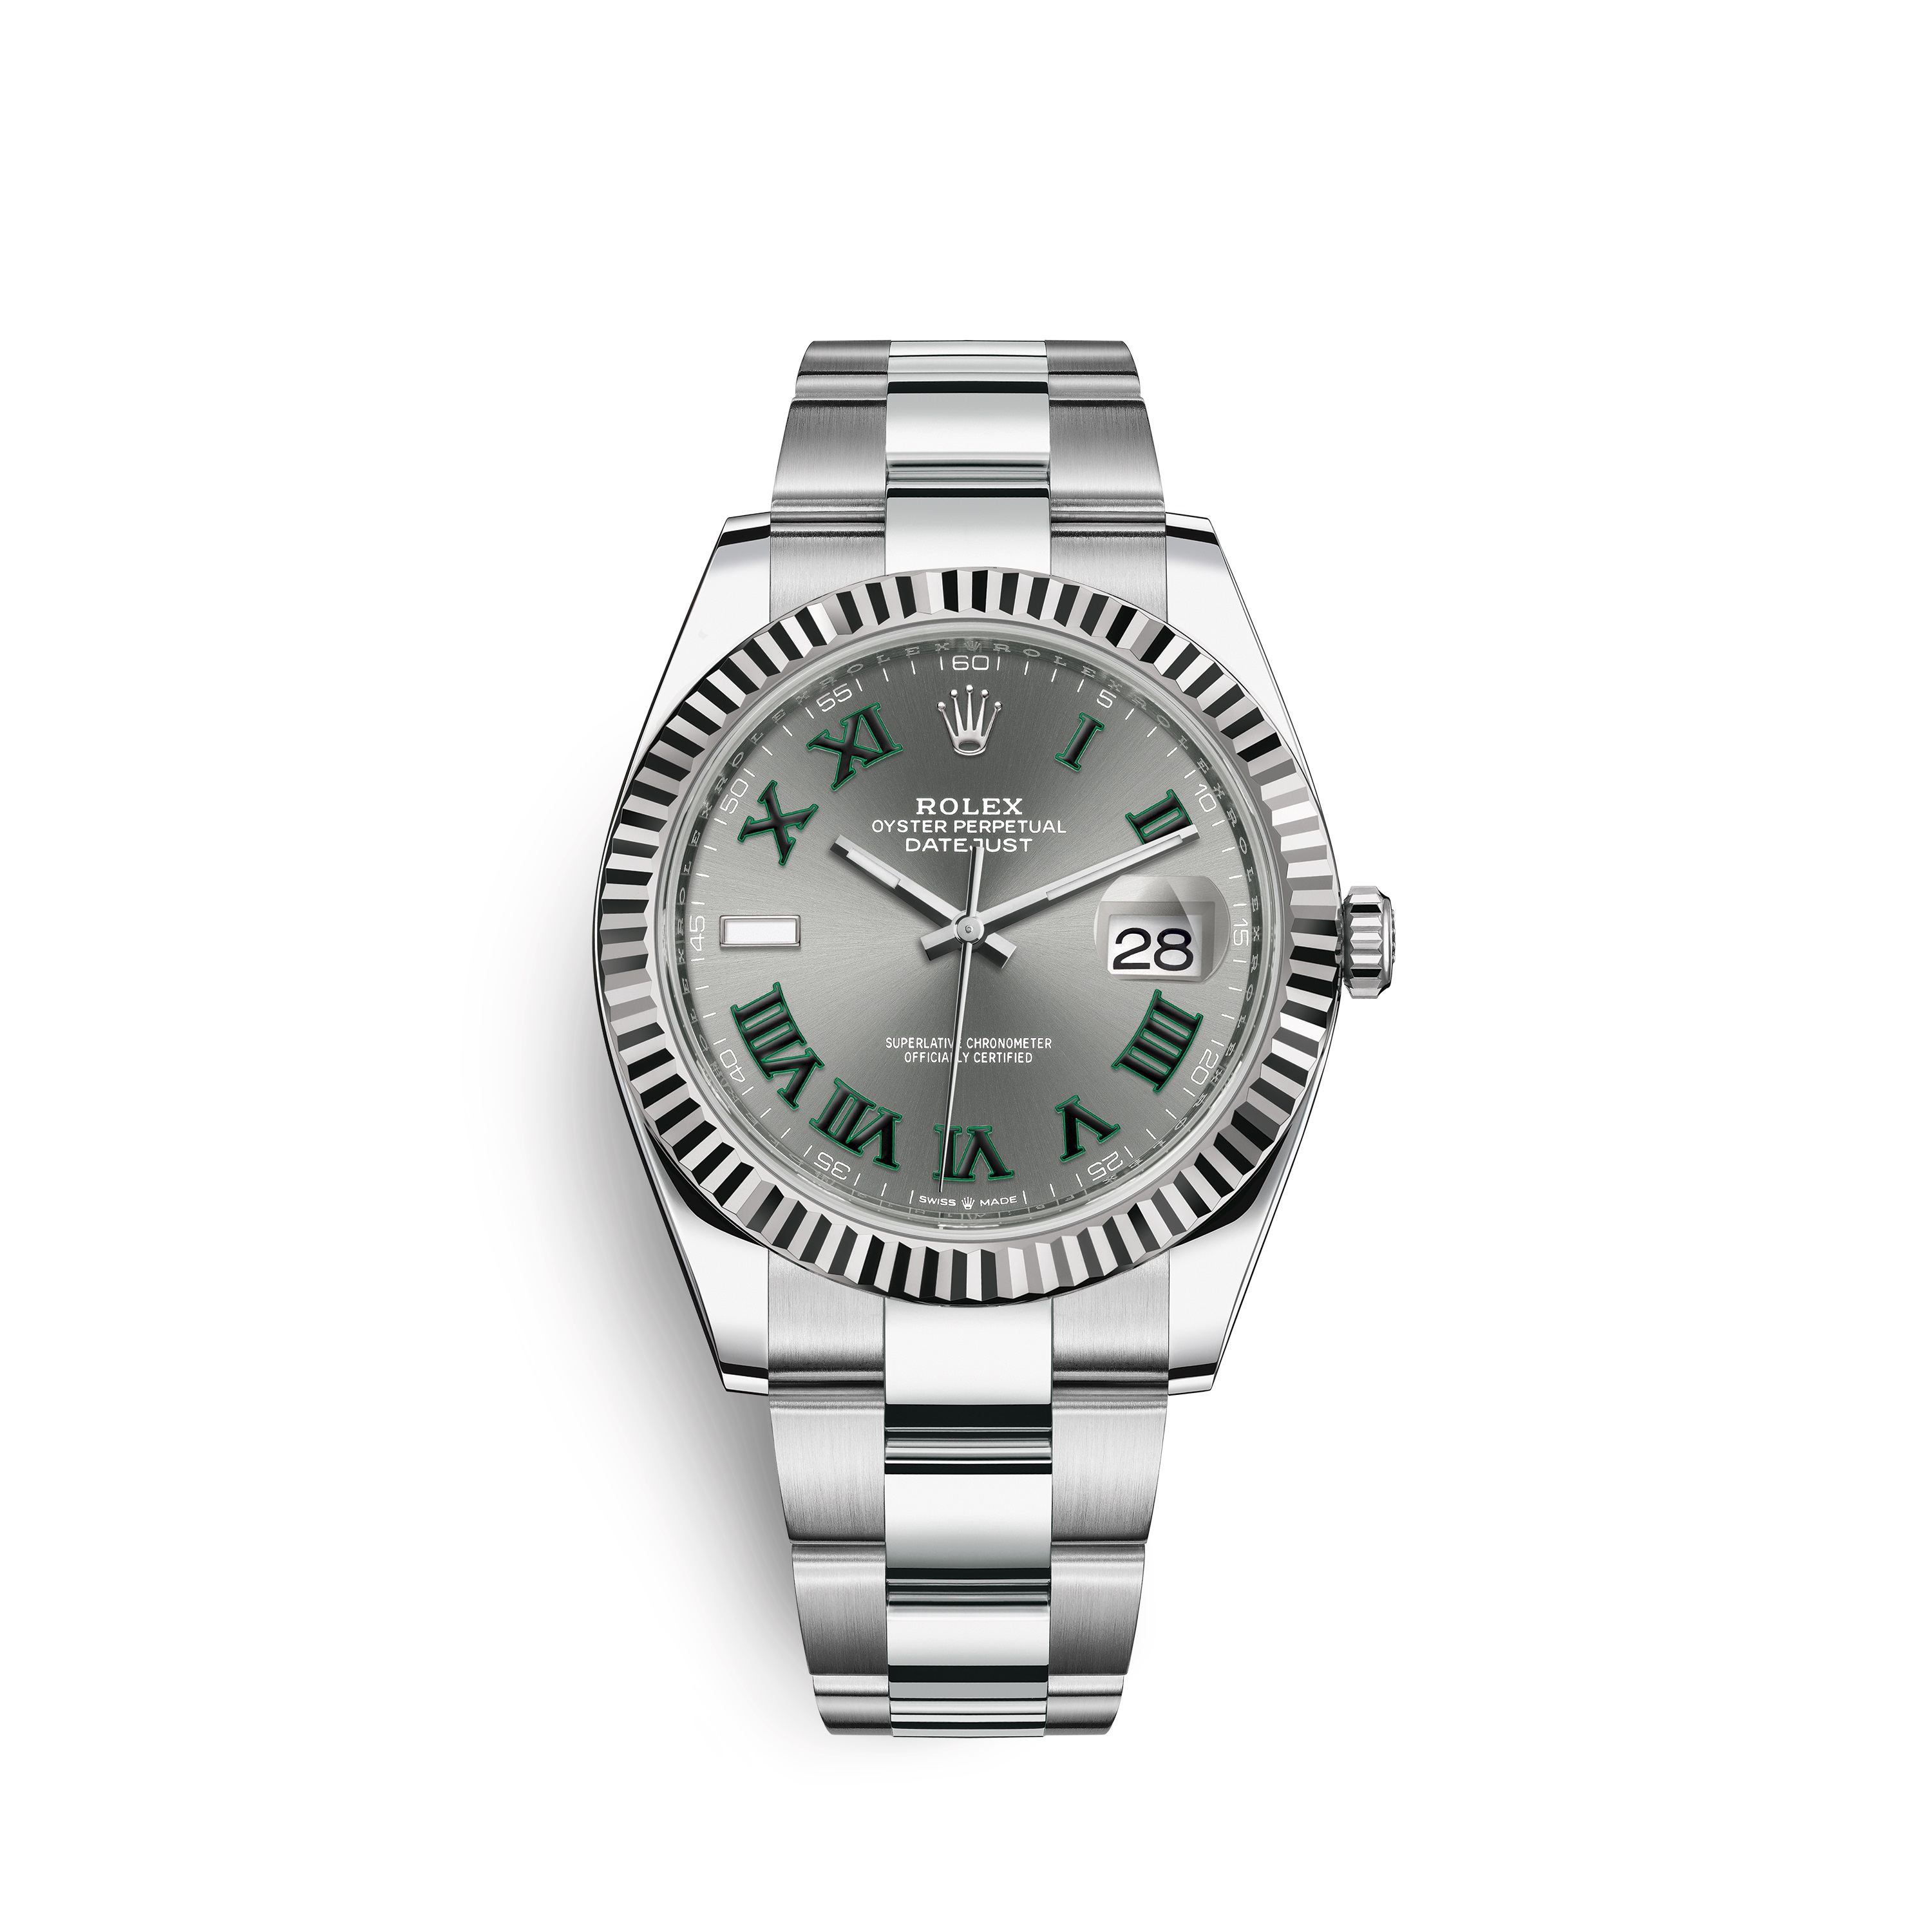 Datejust 41 126334 White Gold & Stainless Steel Watch (Slate)